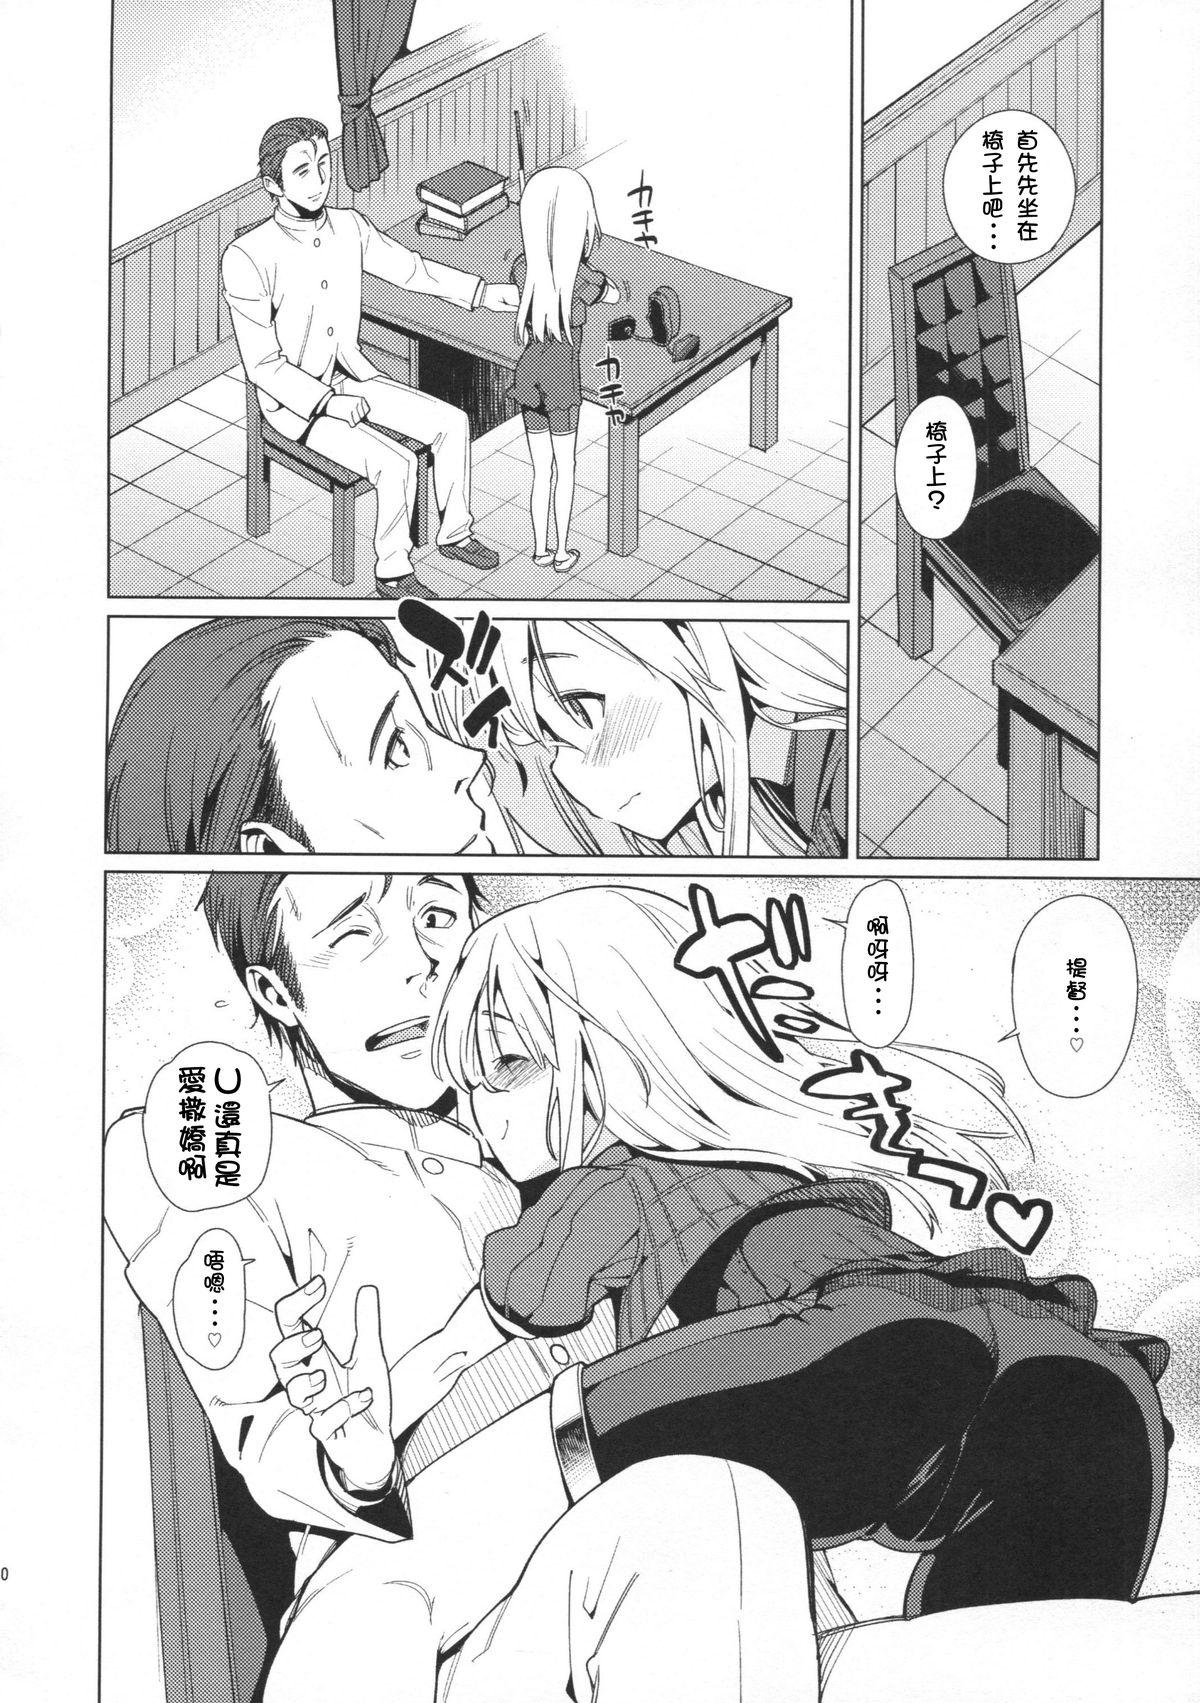 Spanking U are my sweet - Kantai collection Girl Sucking Dick - Page 10